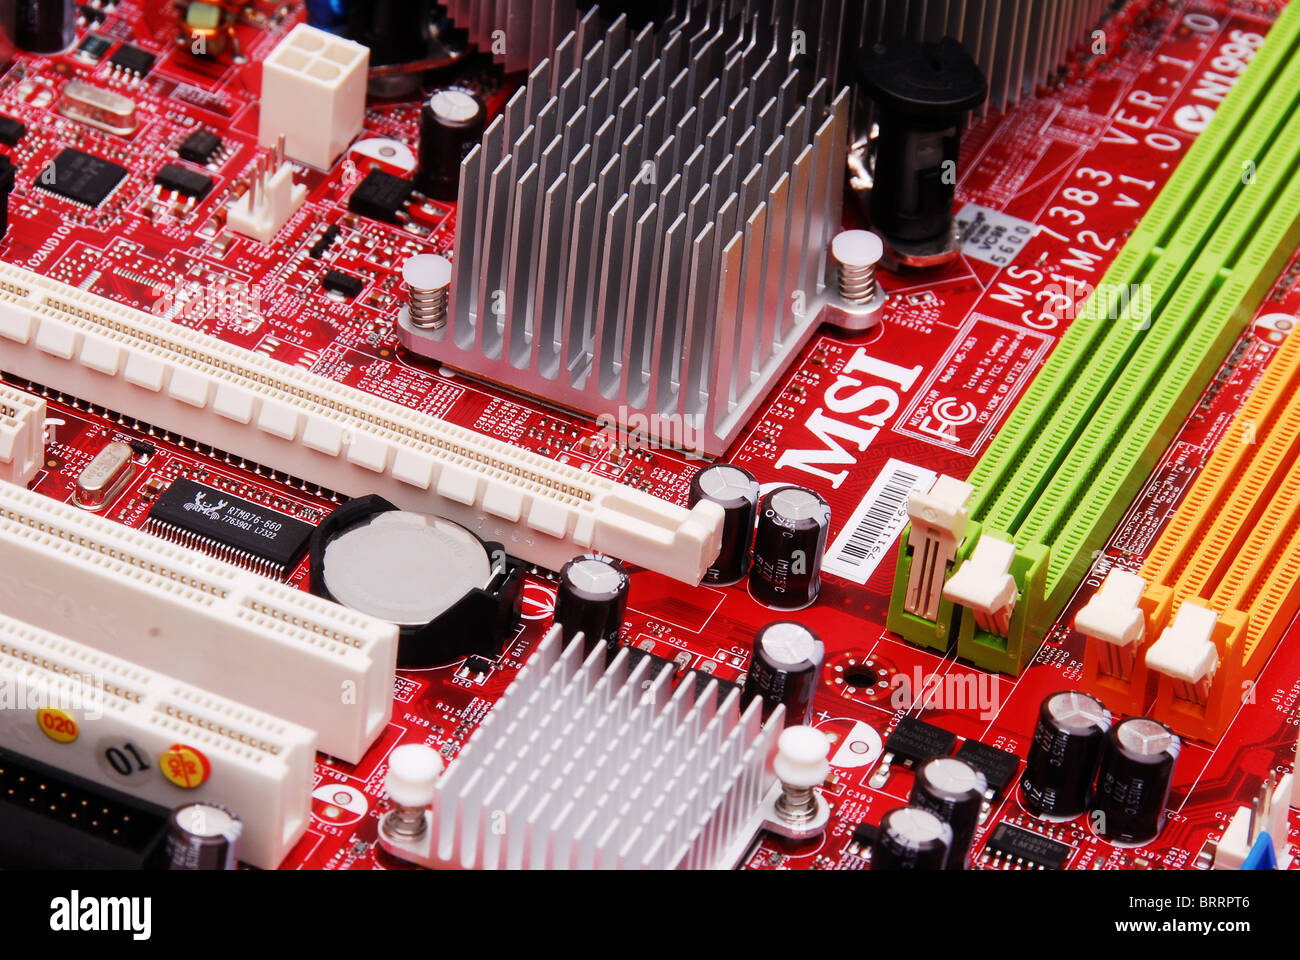 Close-up of a computer motherboard Stock Photo